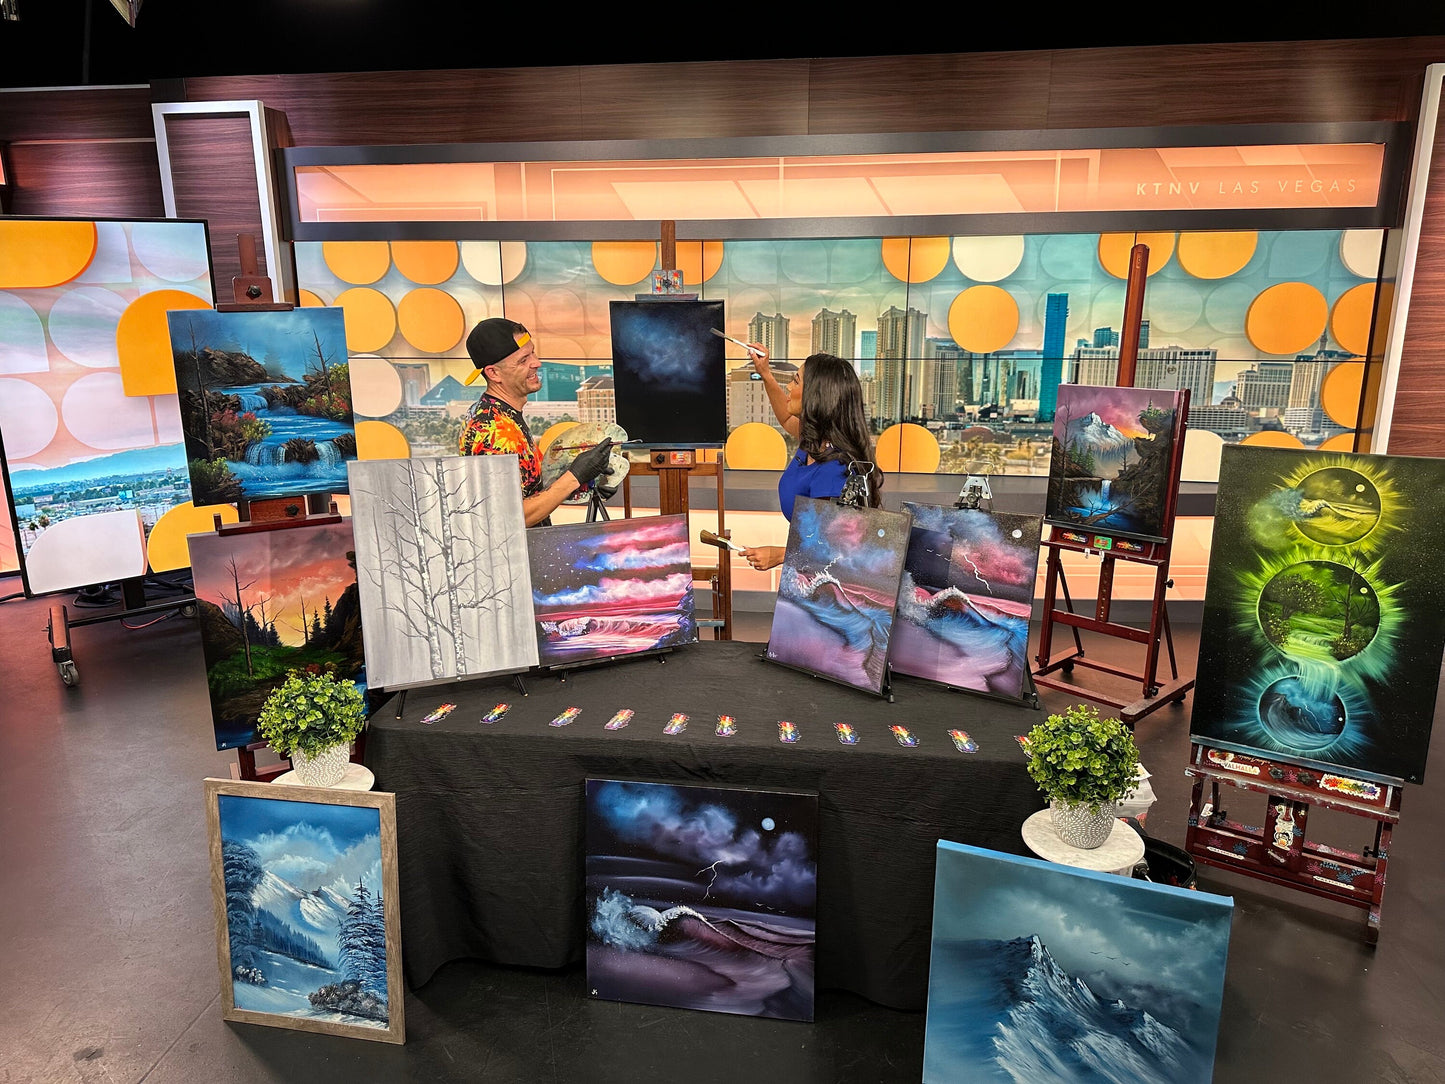 Painting Classes - How to Paint - PaintWithJosh 1 on 1 In-Person Class at City of the World Art Gallery inside Meadow's Mall